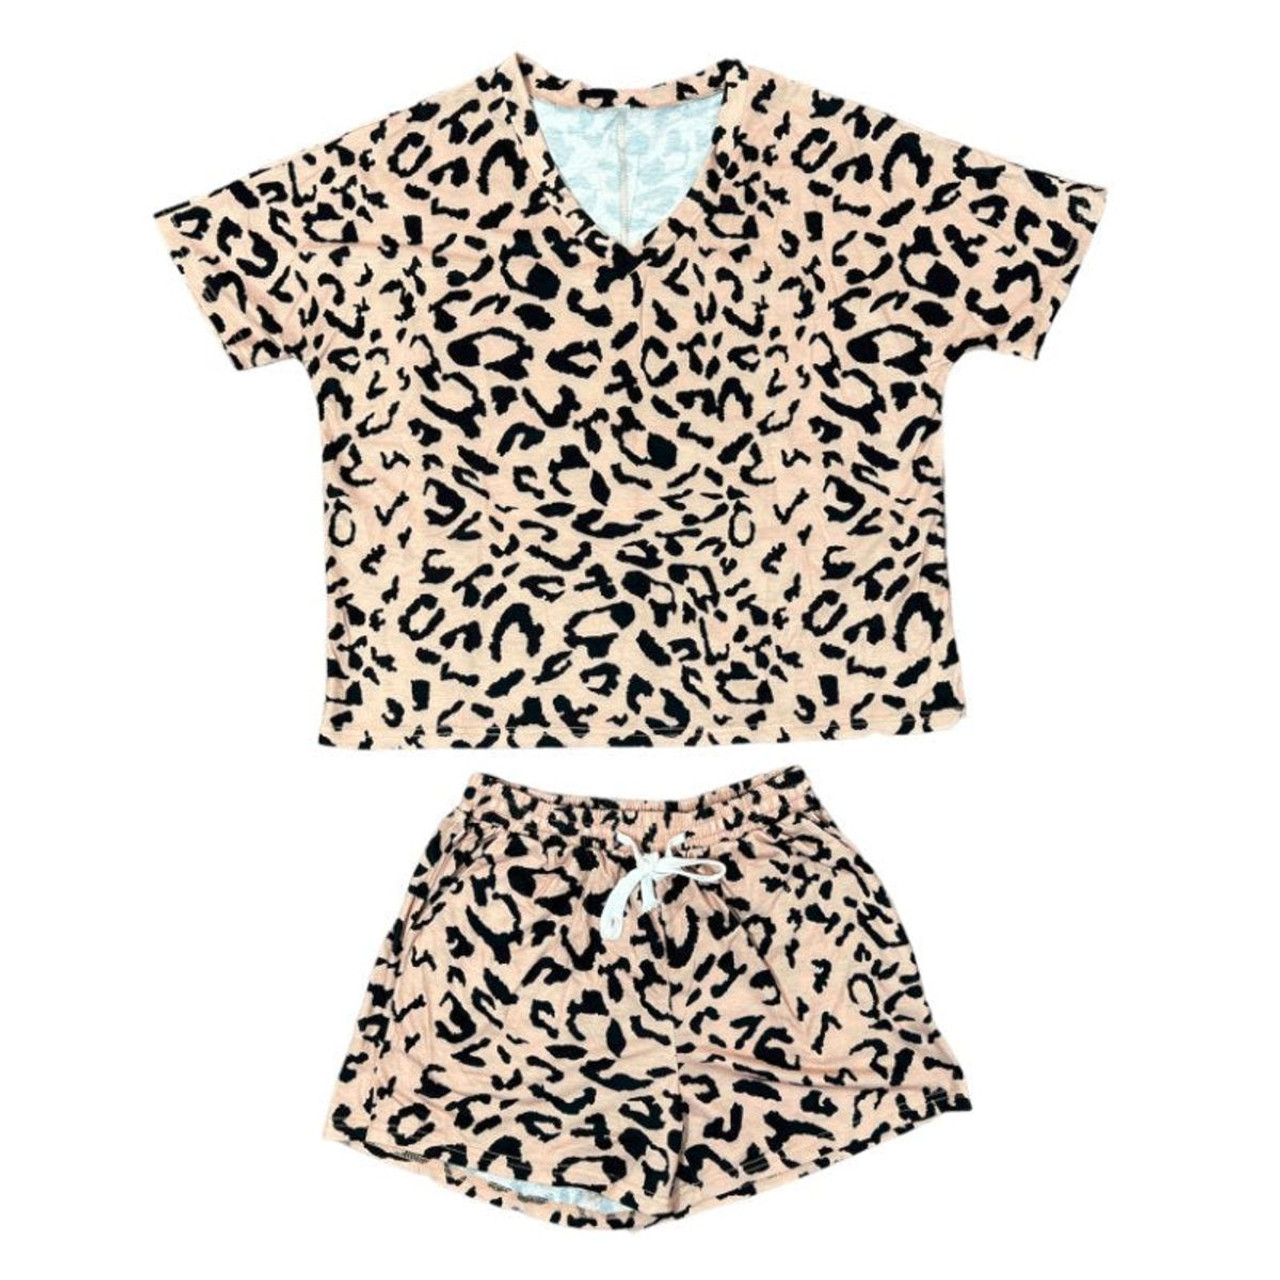 Women's Leopard Print Drawstring Top and Shorts Set product image